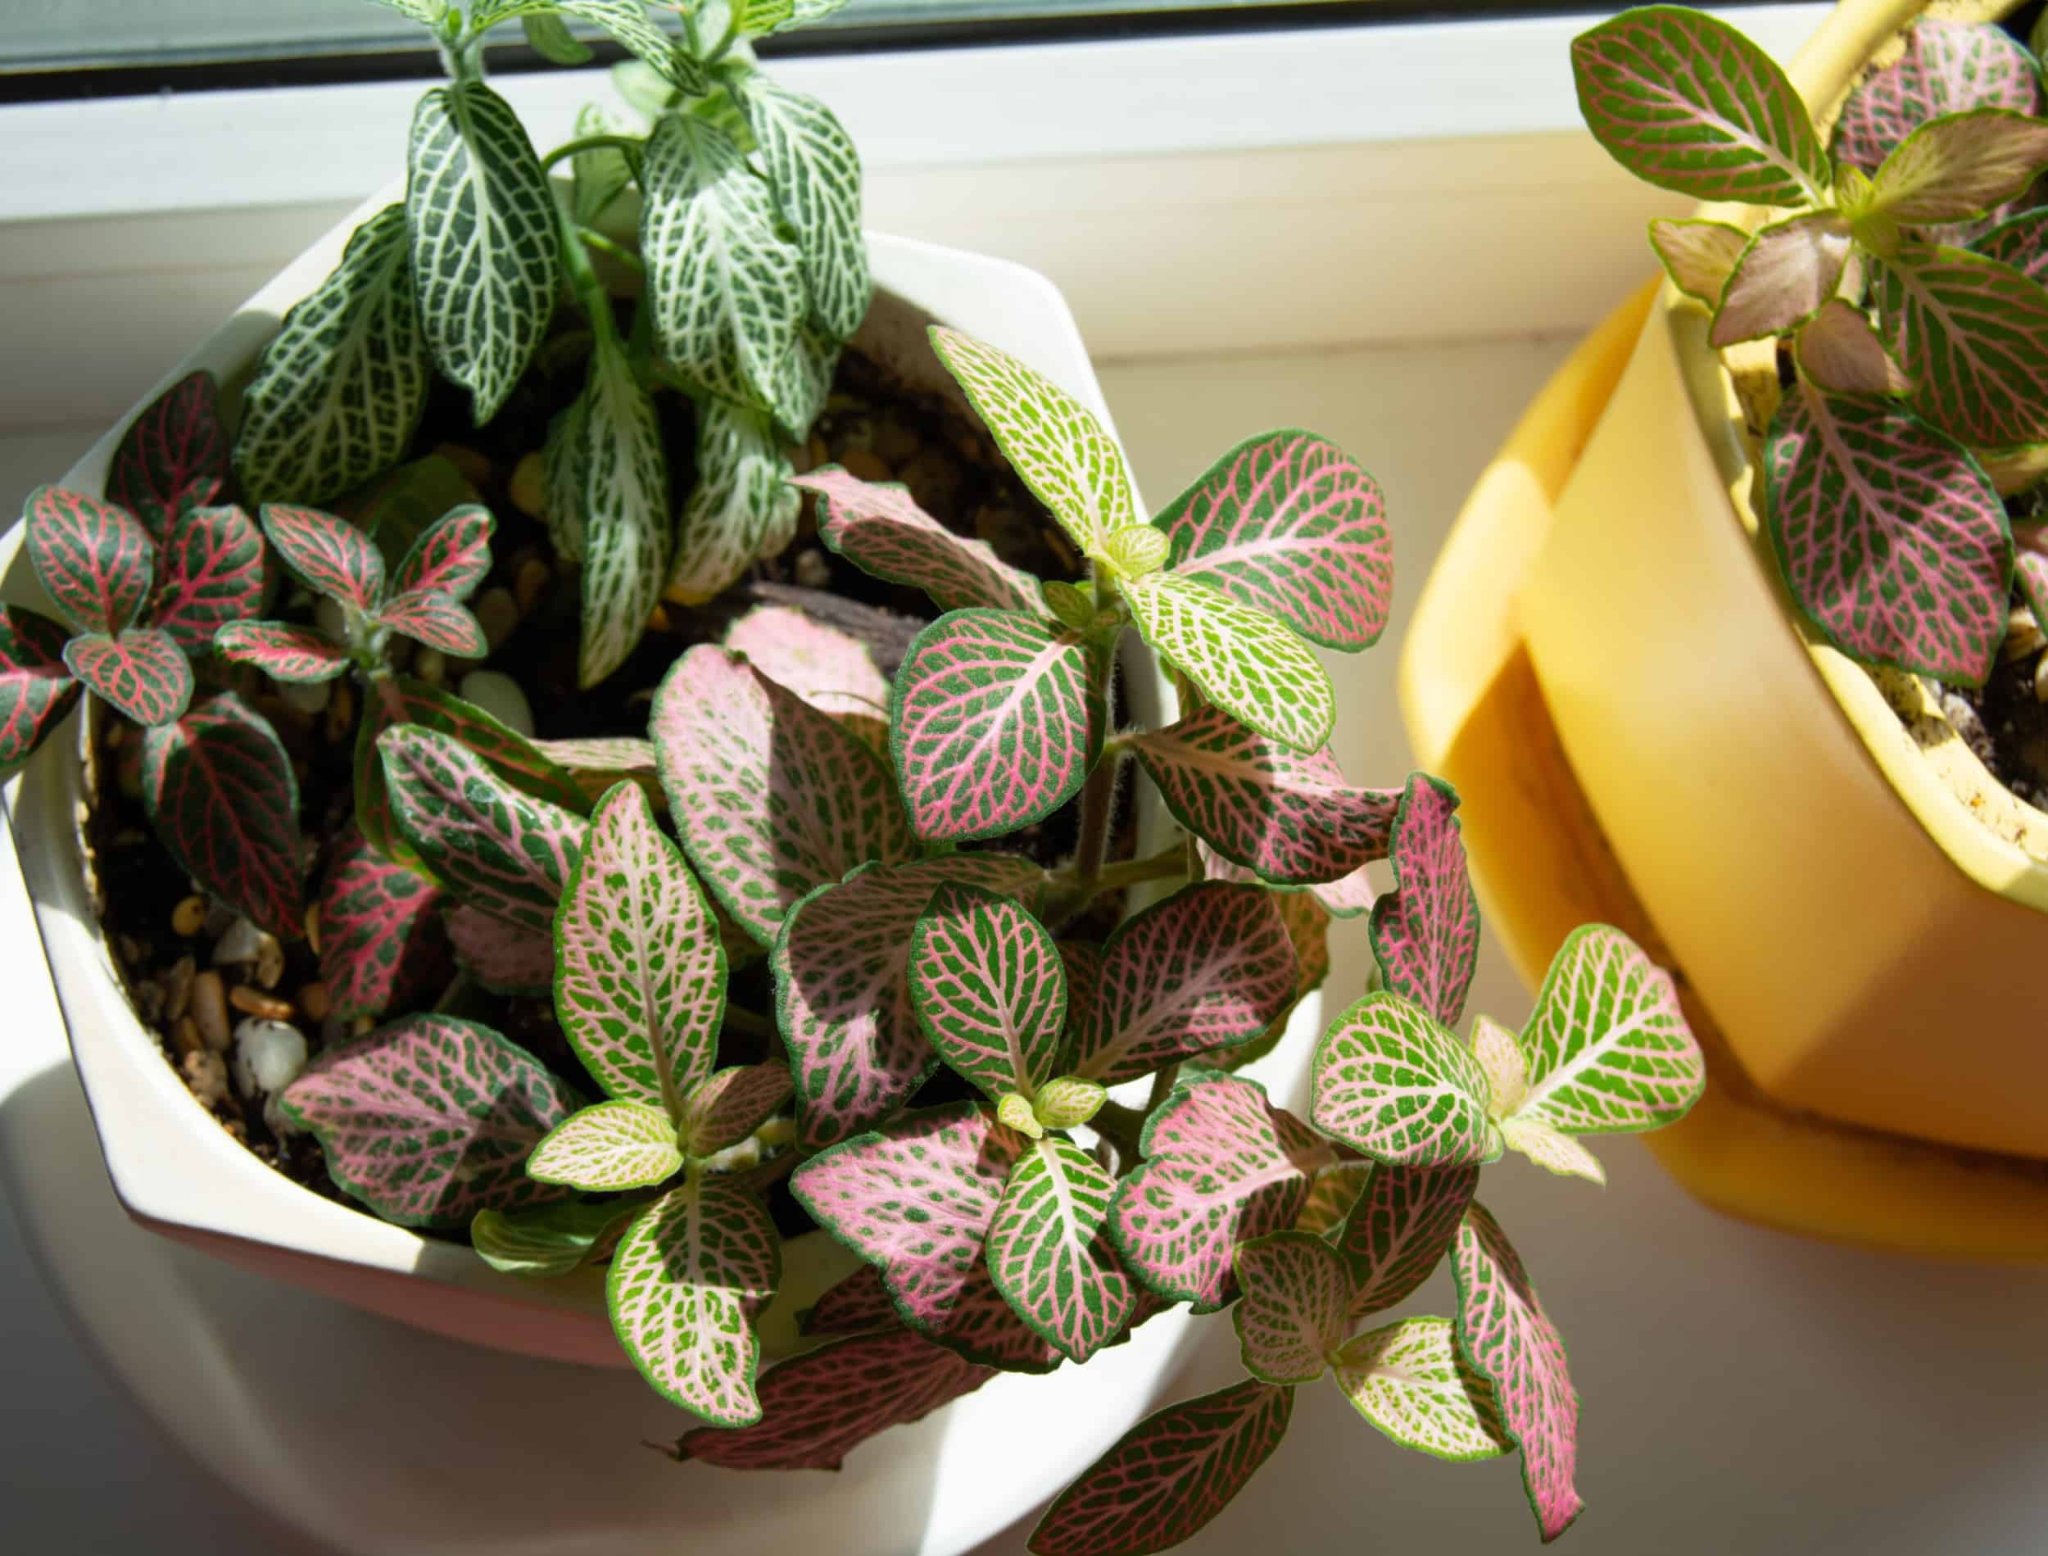 The Most Aesthetically Pleasing Houseplants to Add to Your Collection